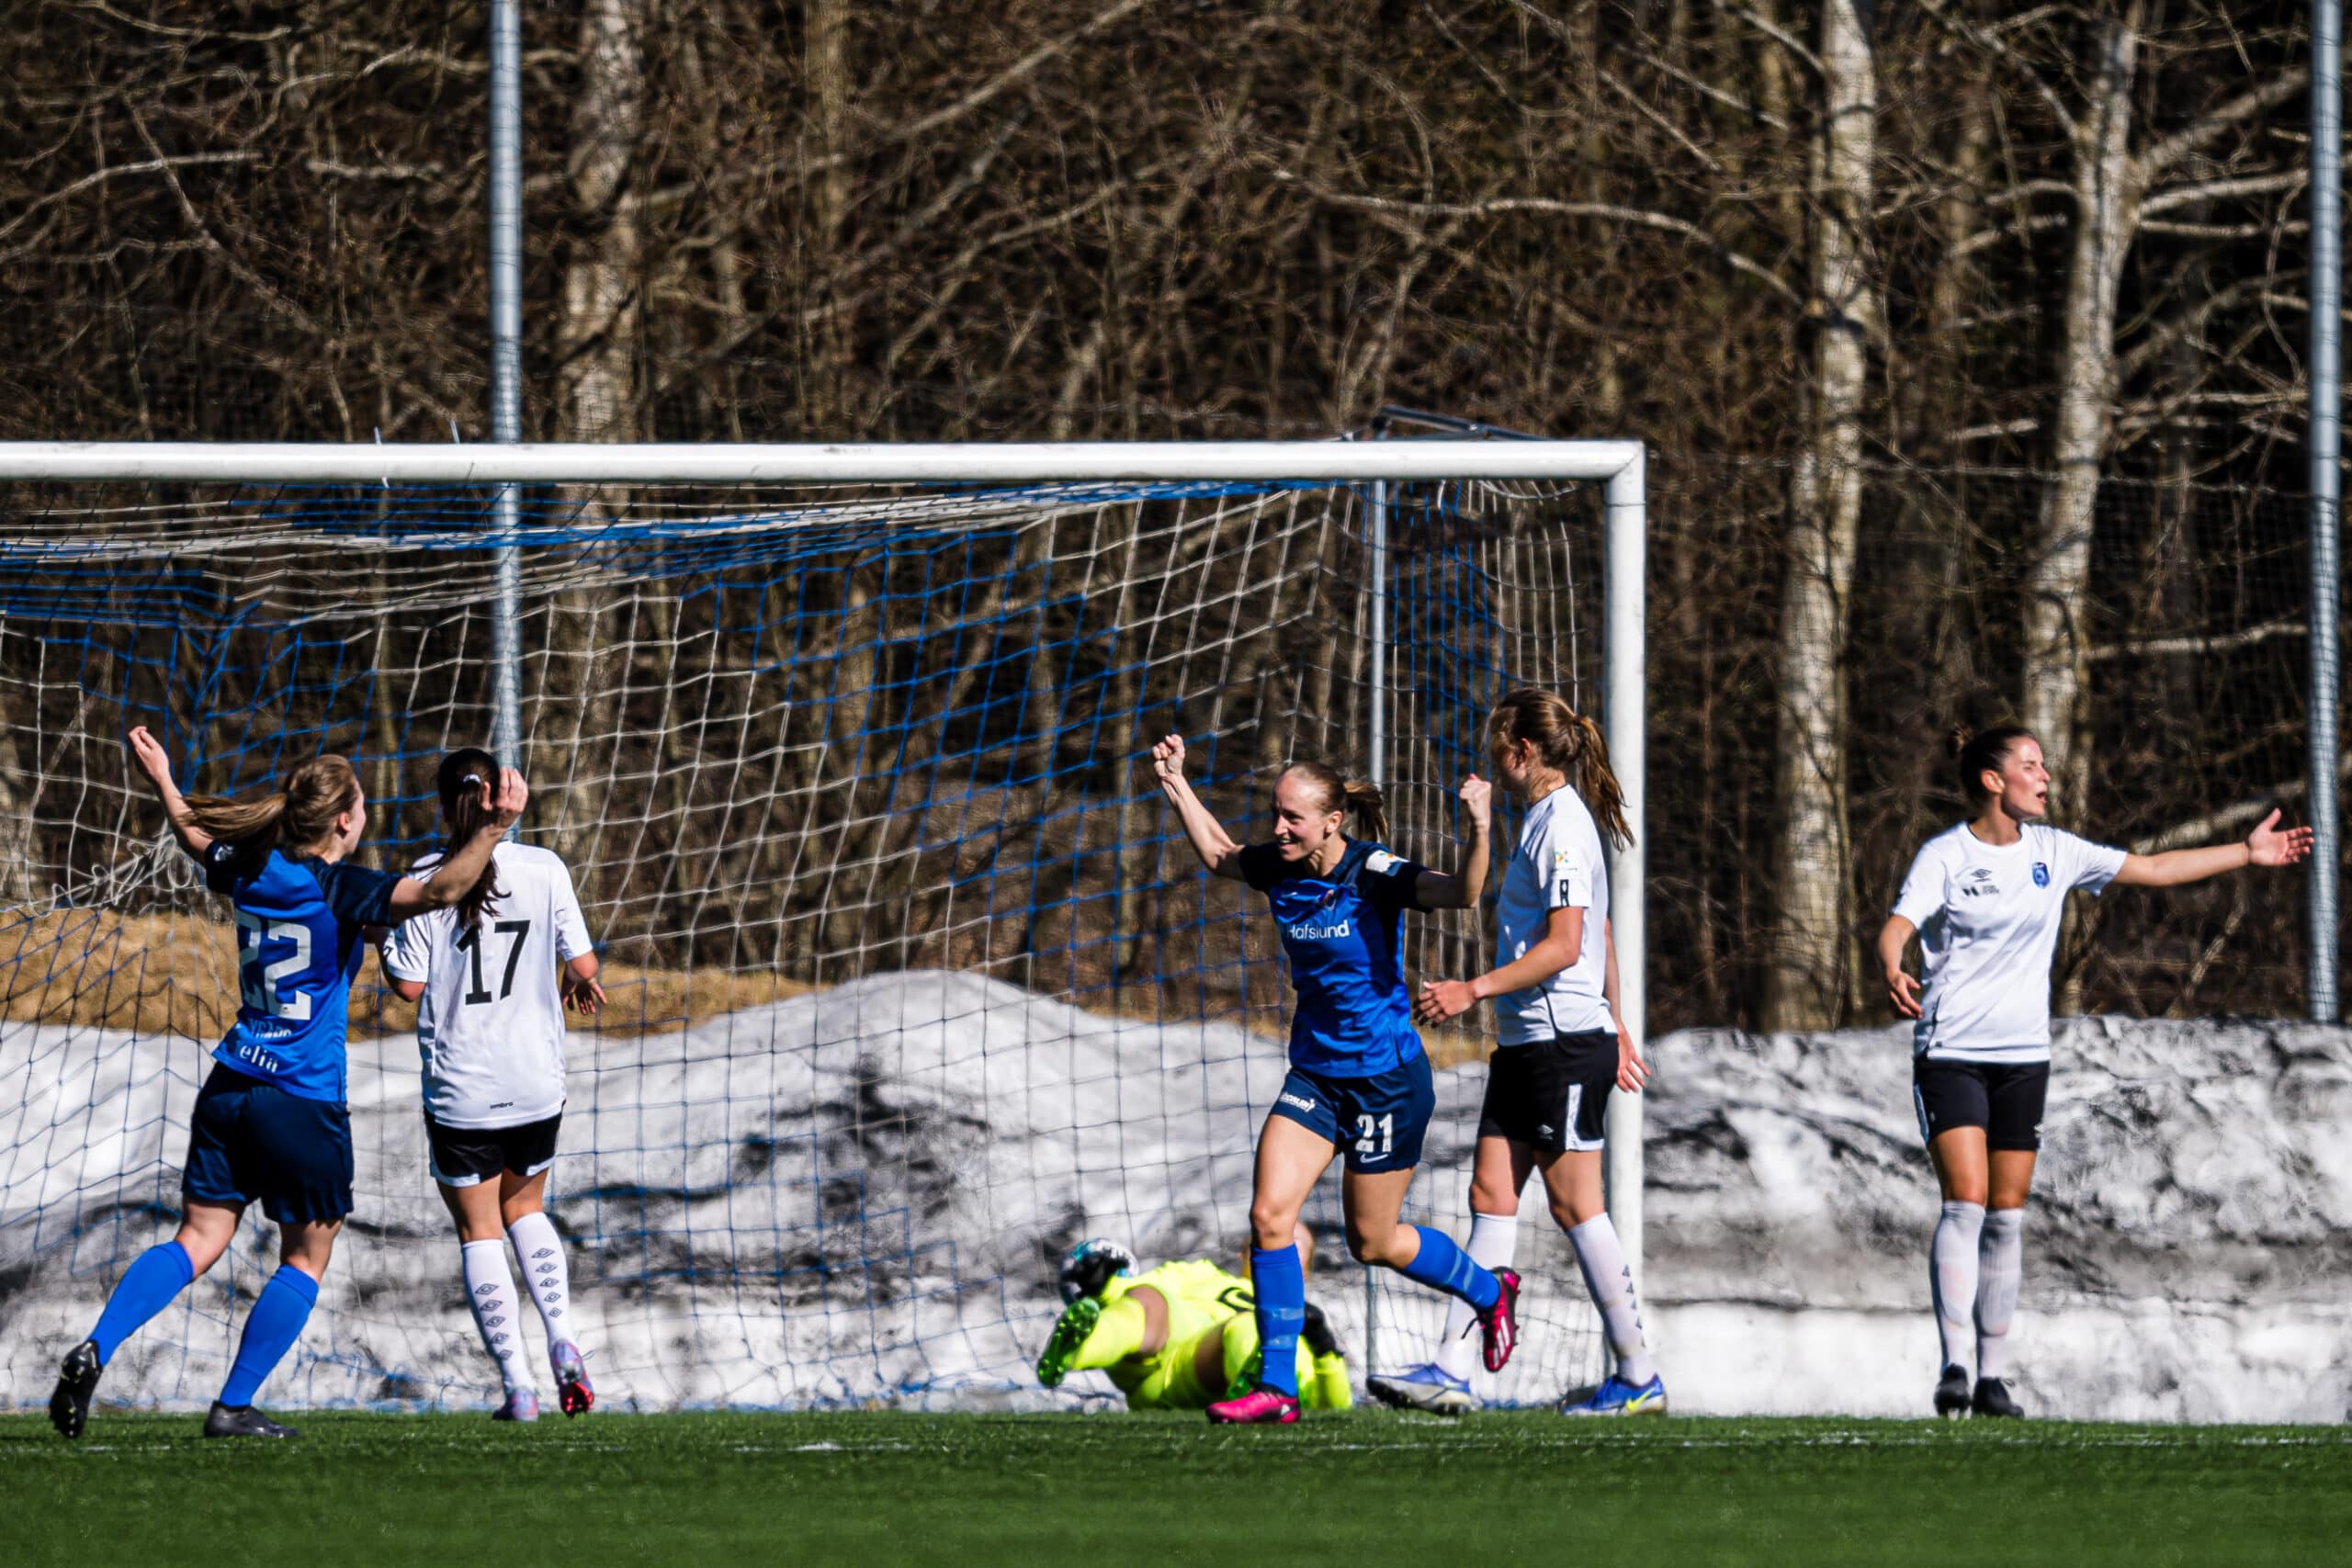 230422 Celina Opland Smith of Grei celebrates after scoring the 1-0 goal during the 1. division football match between Grei and Fyllingsdalen on April 22, 2023 in Oslo.
Photo: Marius Simensen / BILDBYRÅN / Cop 238